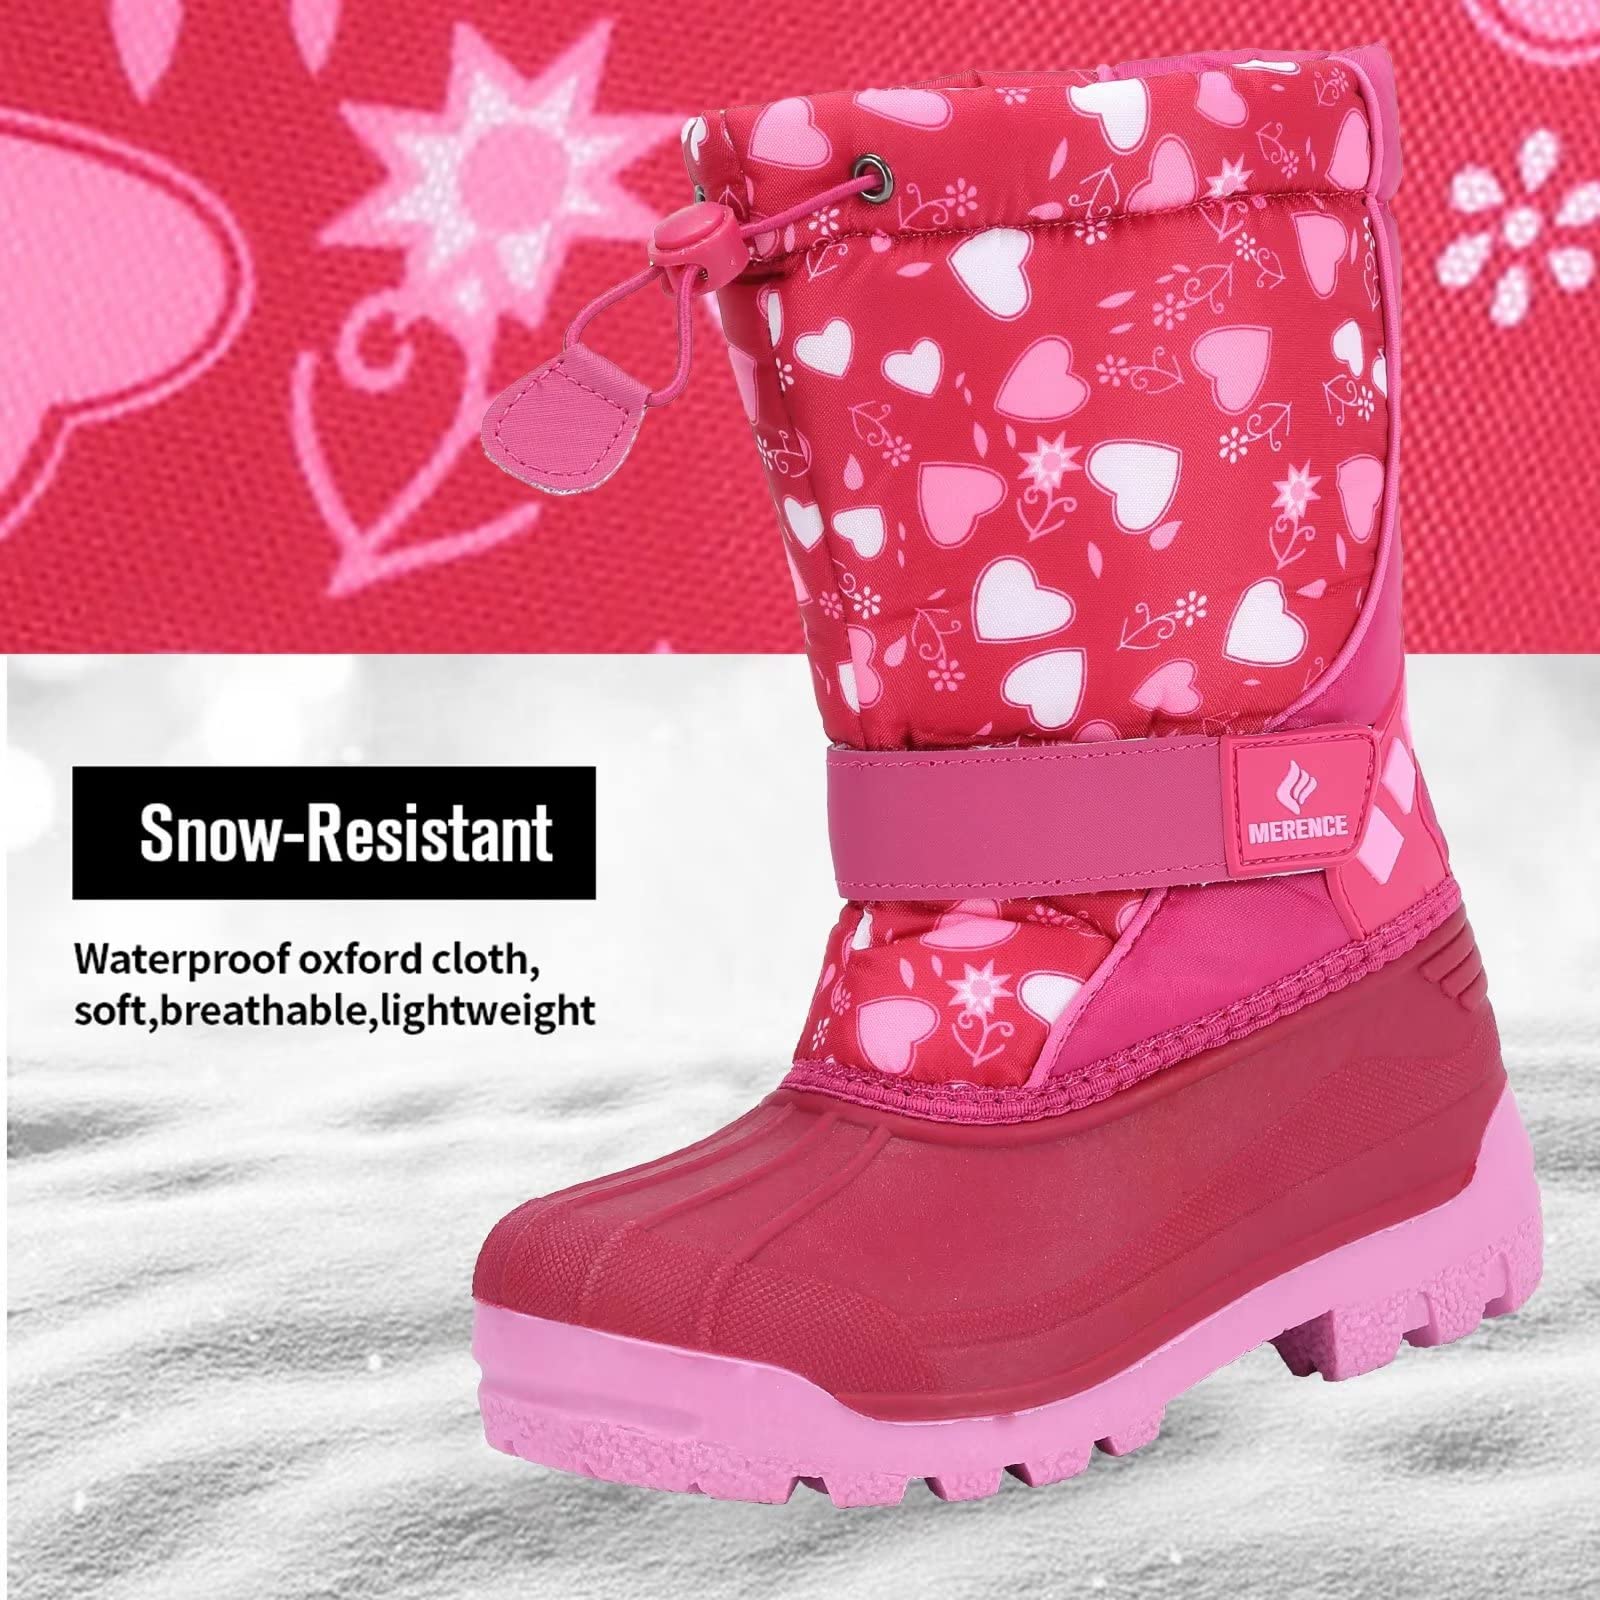 CIOR Kids Snow Boots for Boys Girls Toddler Winter Outdoor Boots Waterproof with Fur Lined(Toddler/Little Kids/Big Kid)